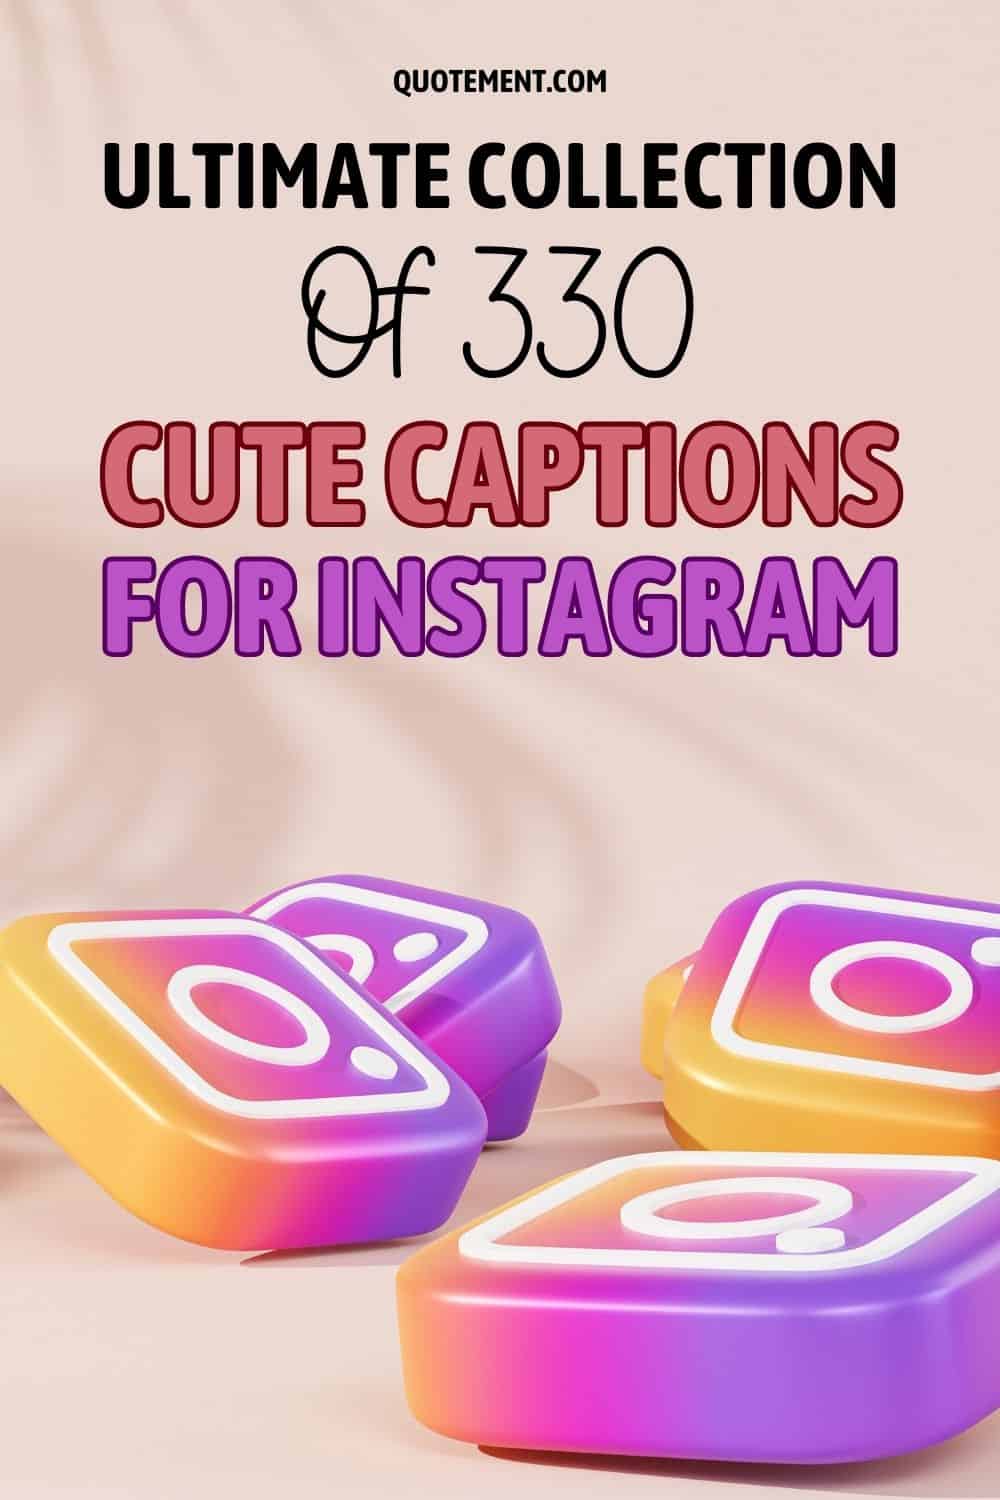 Ultimate Collection Of 330 Cute Captions For Instagram pinterest